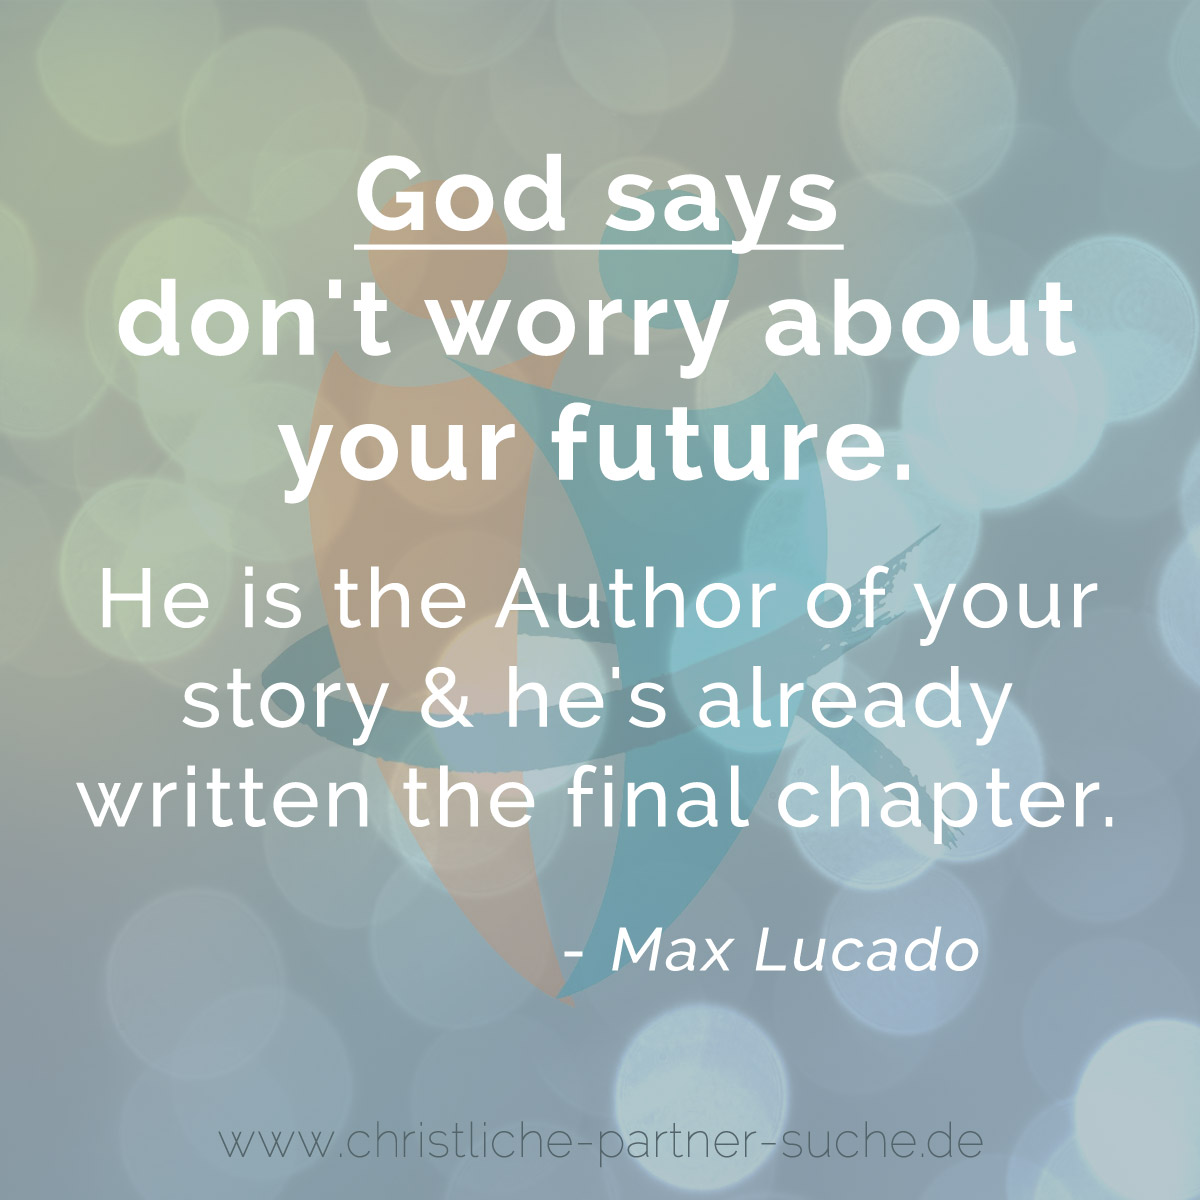 God says don't worry about your future